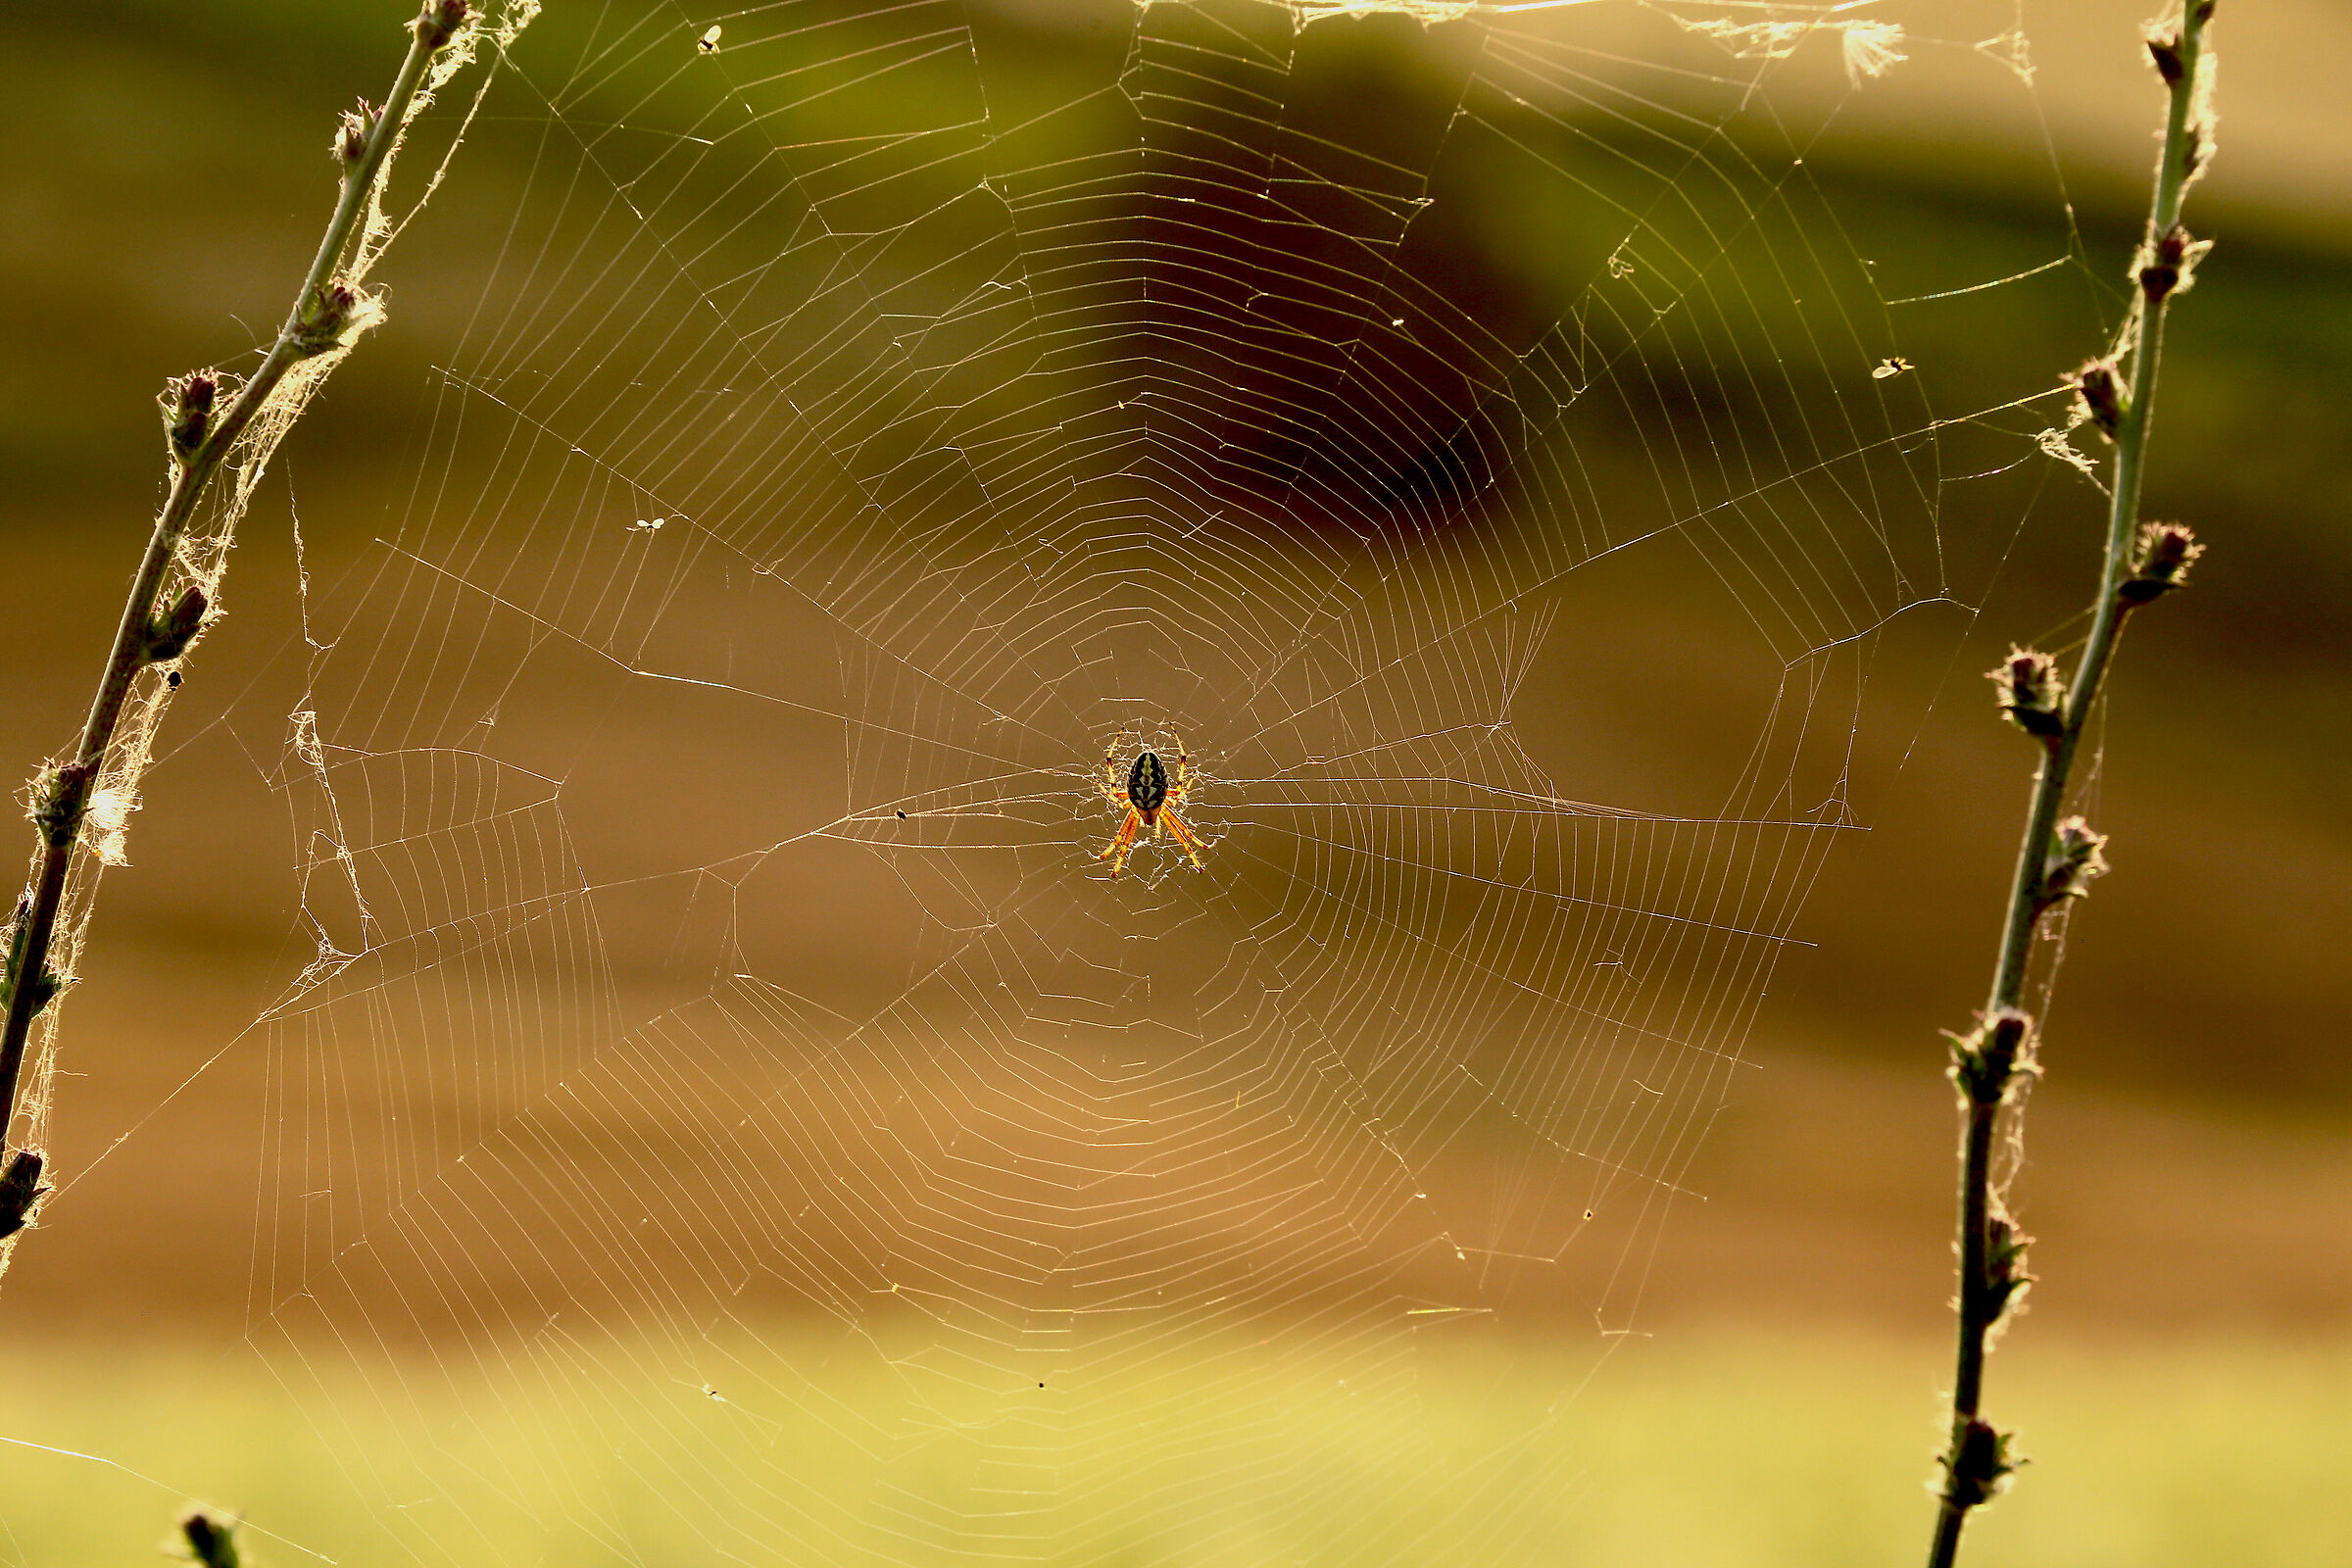 The Spider's Web...